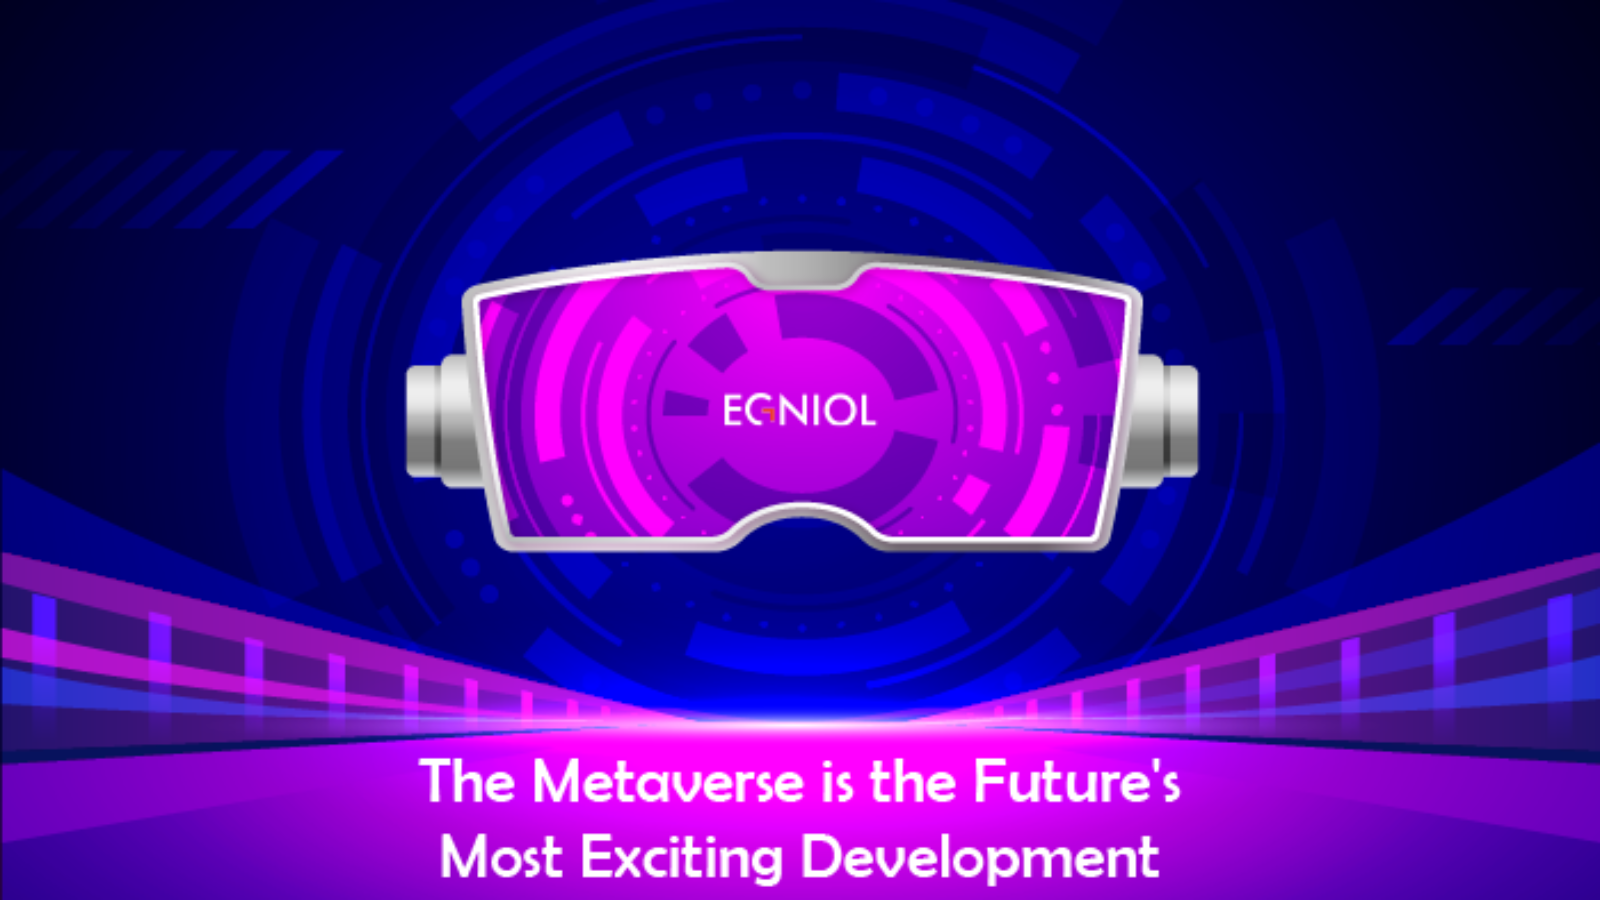 The Metaverse is the Future’s Most Exciting Development - By Egniol